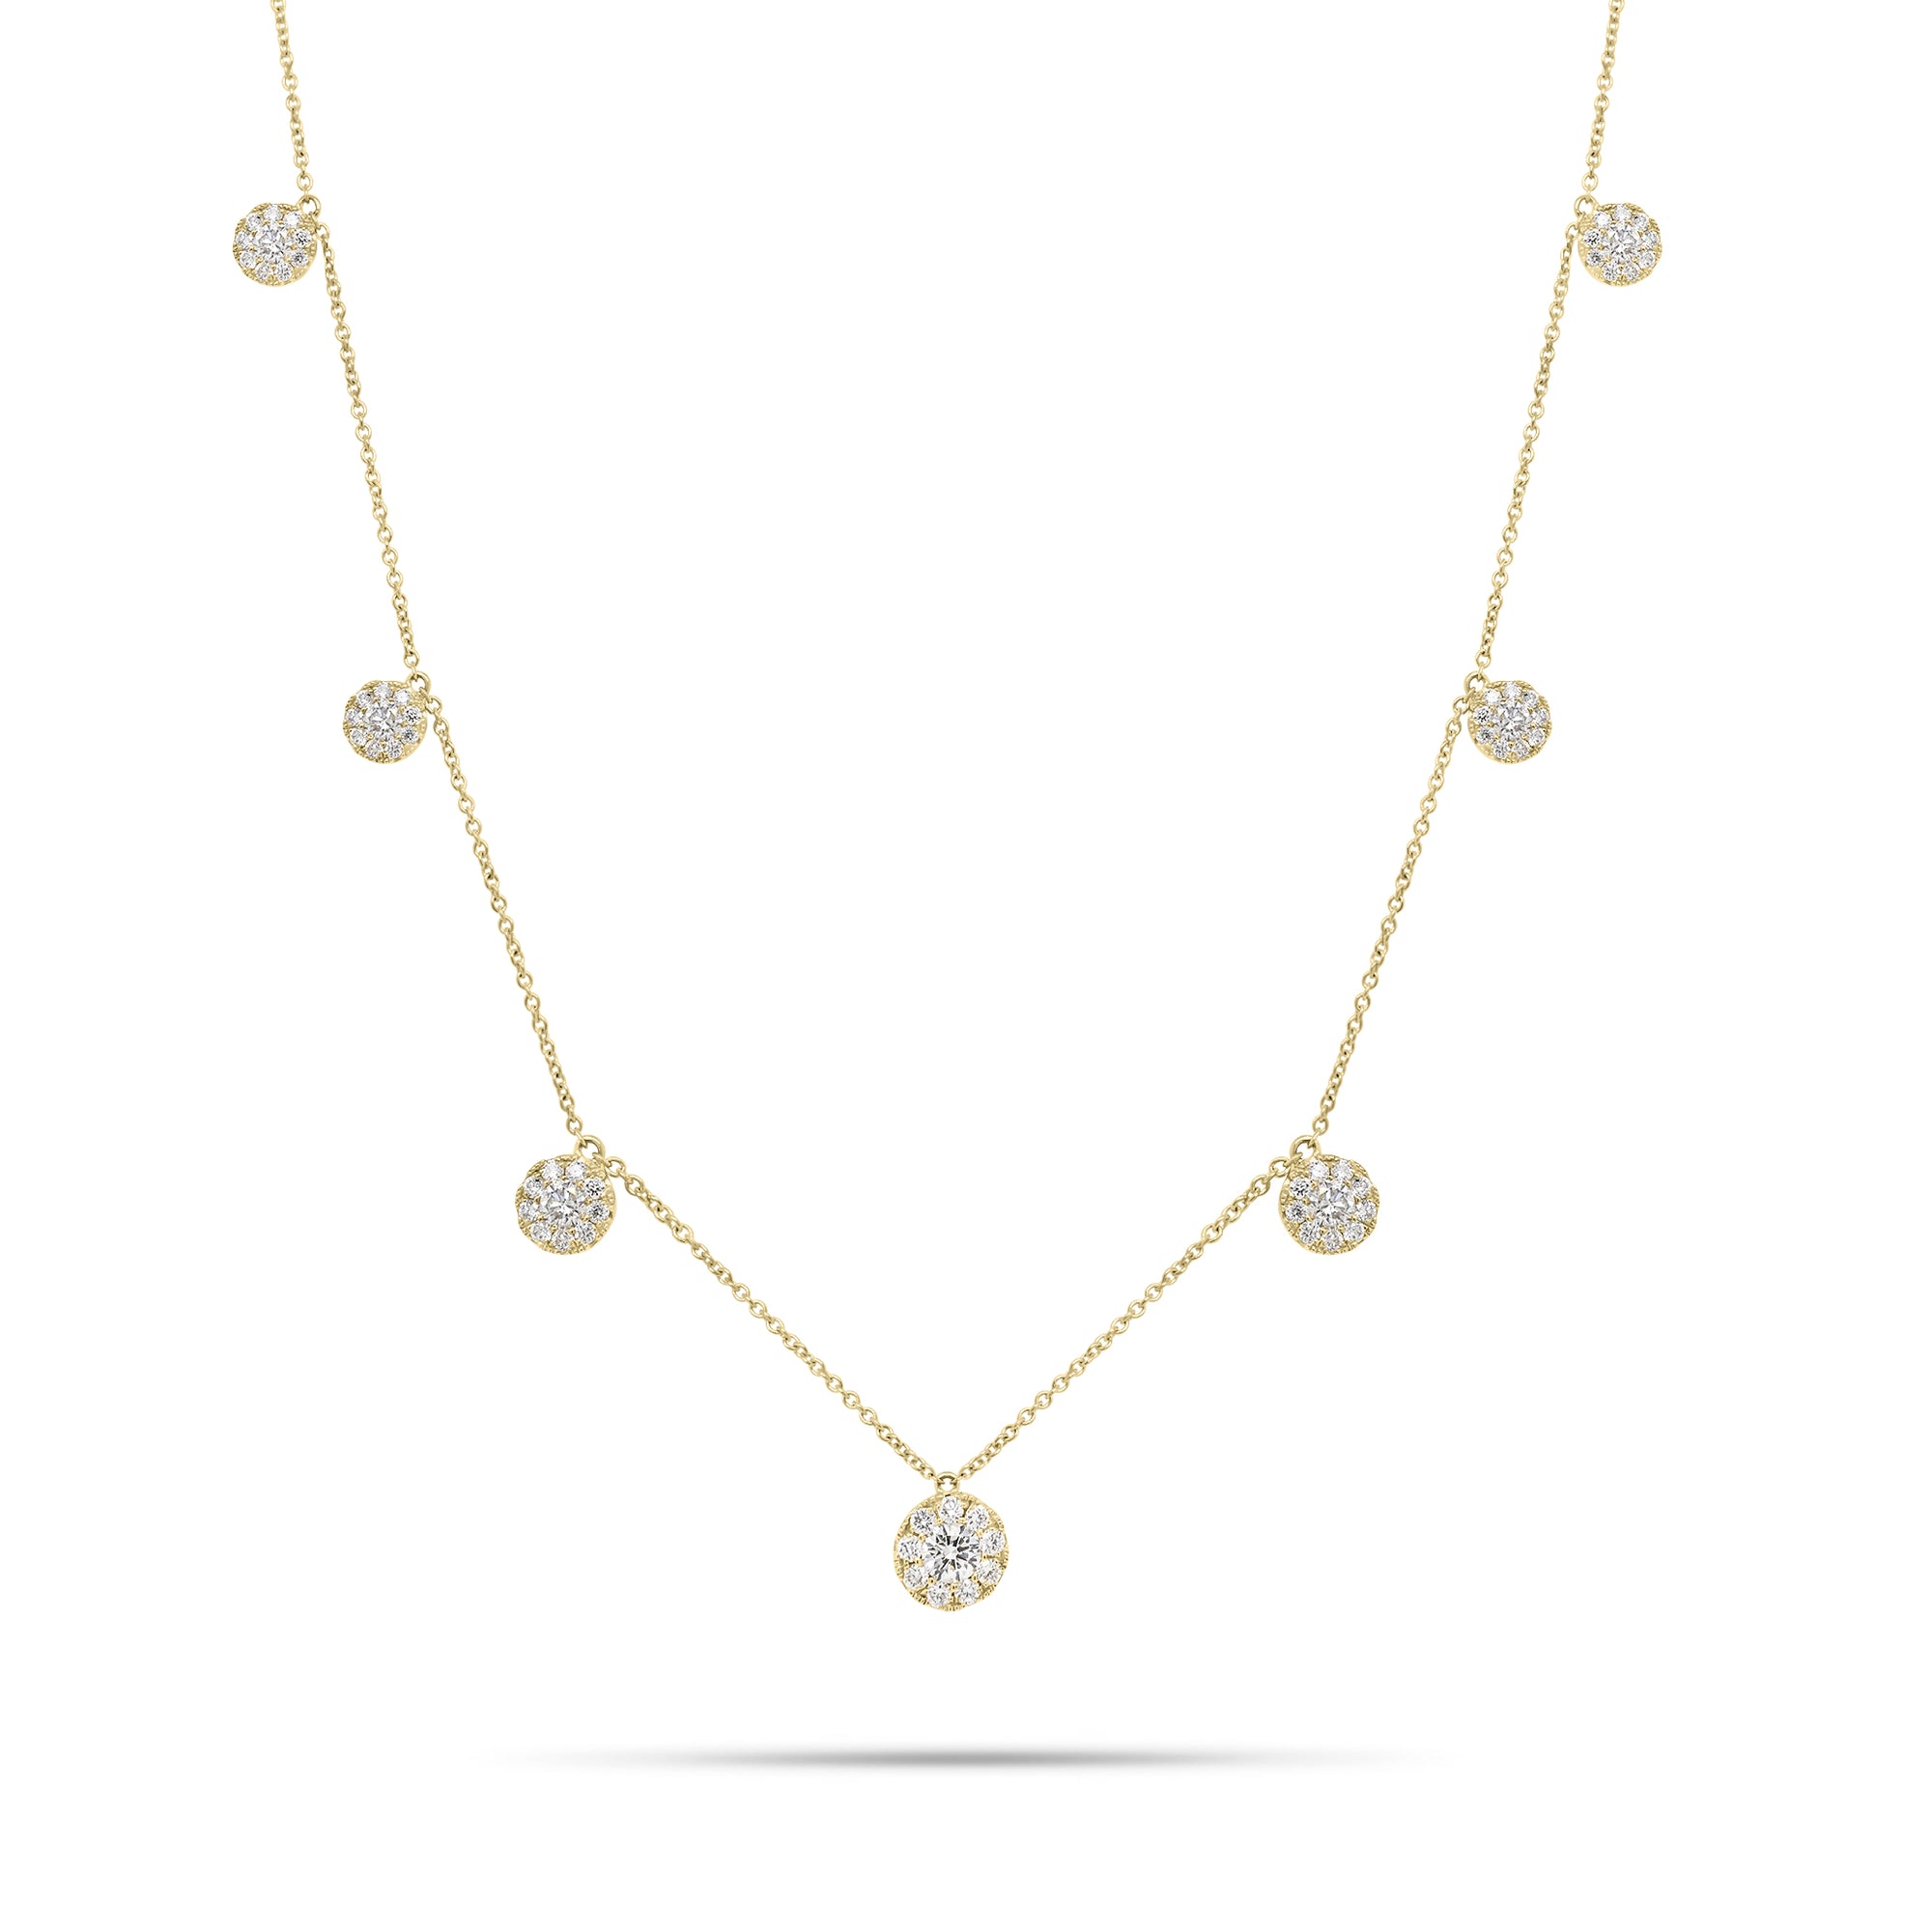 Pave Diamond Mini Discs Necklace  - 18K gold weighing 4.43 grams  - 70 round diamonds weighing 0.82 carats